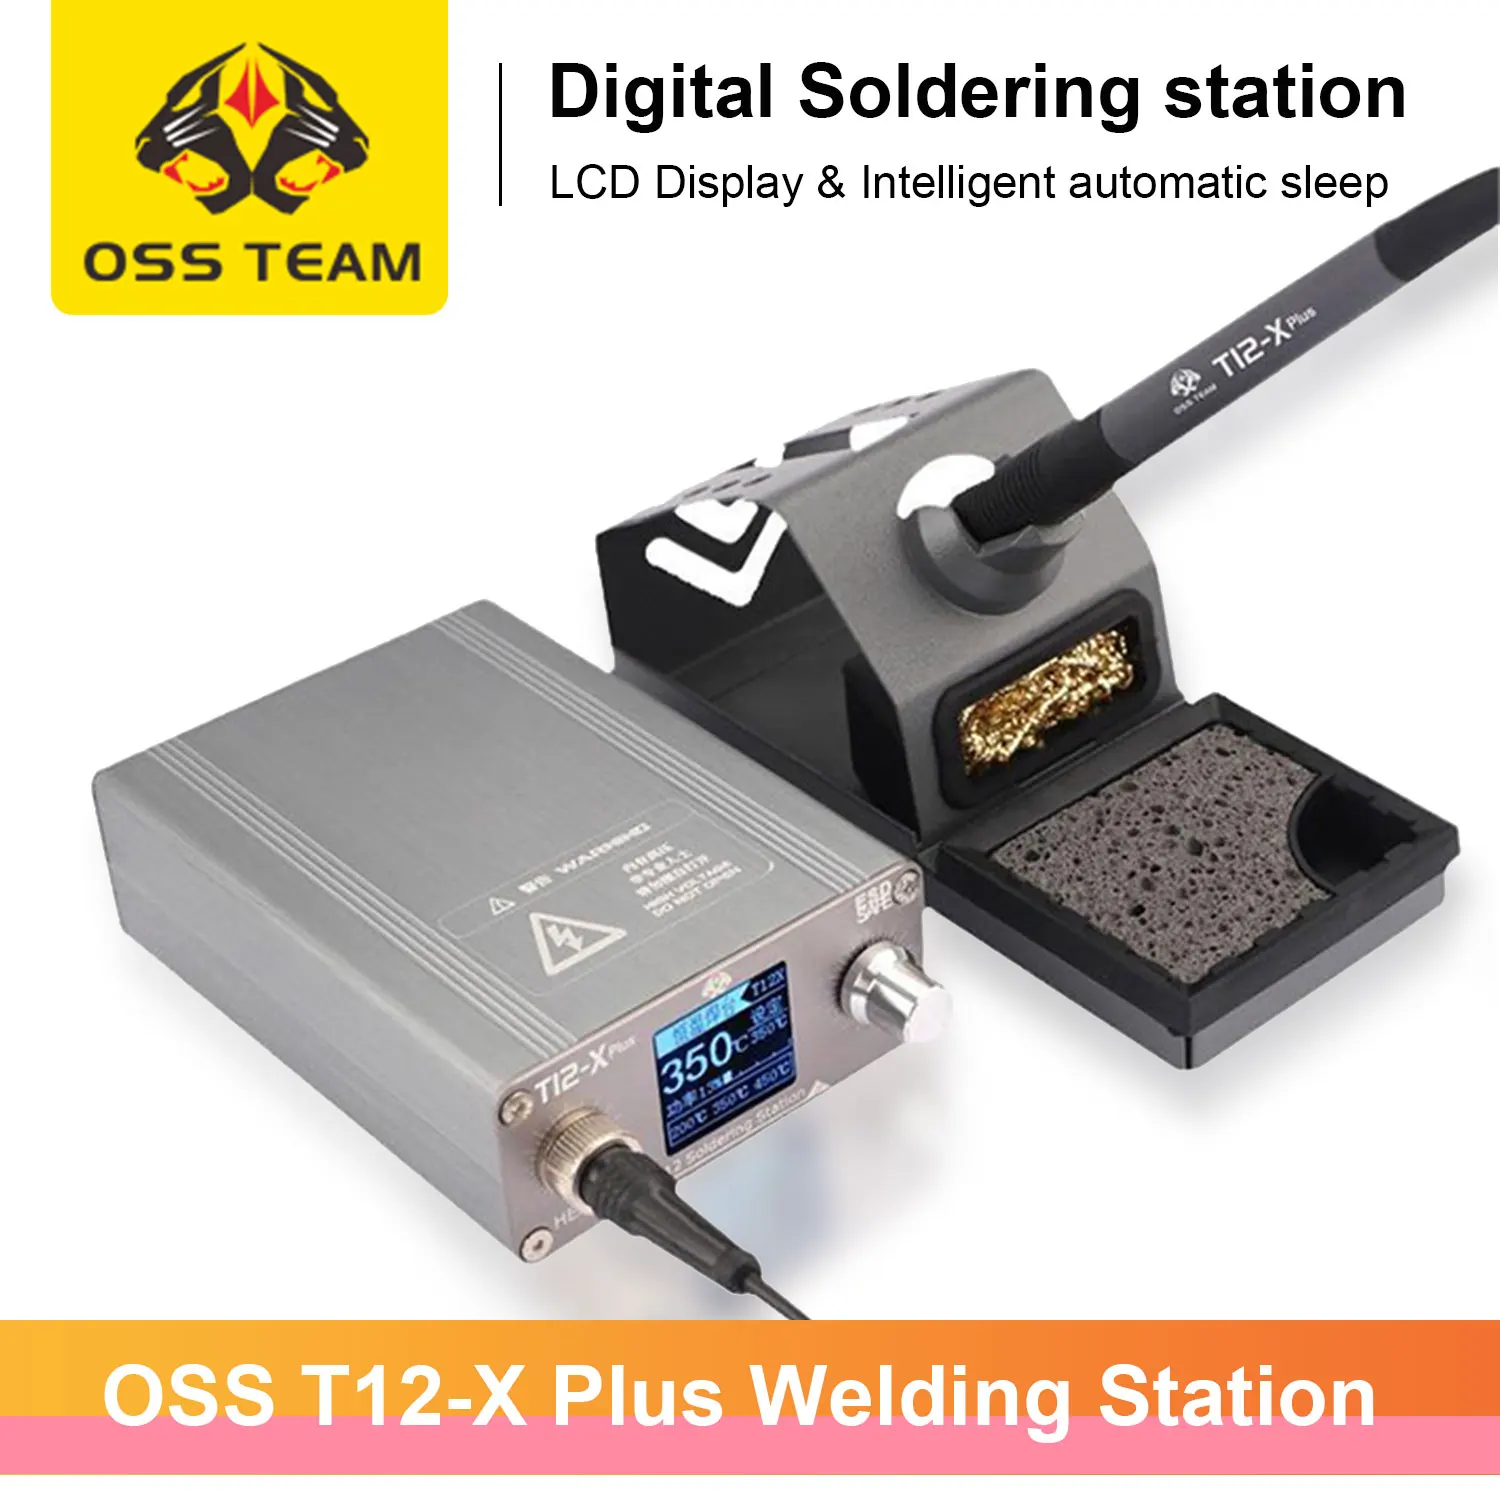 

OSS T12-X Plus Soldering Station Digital Welding Equipment Solder Machine with T12 Tips for Electronic Phone PCB Repair Tools